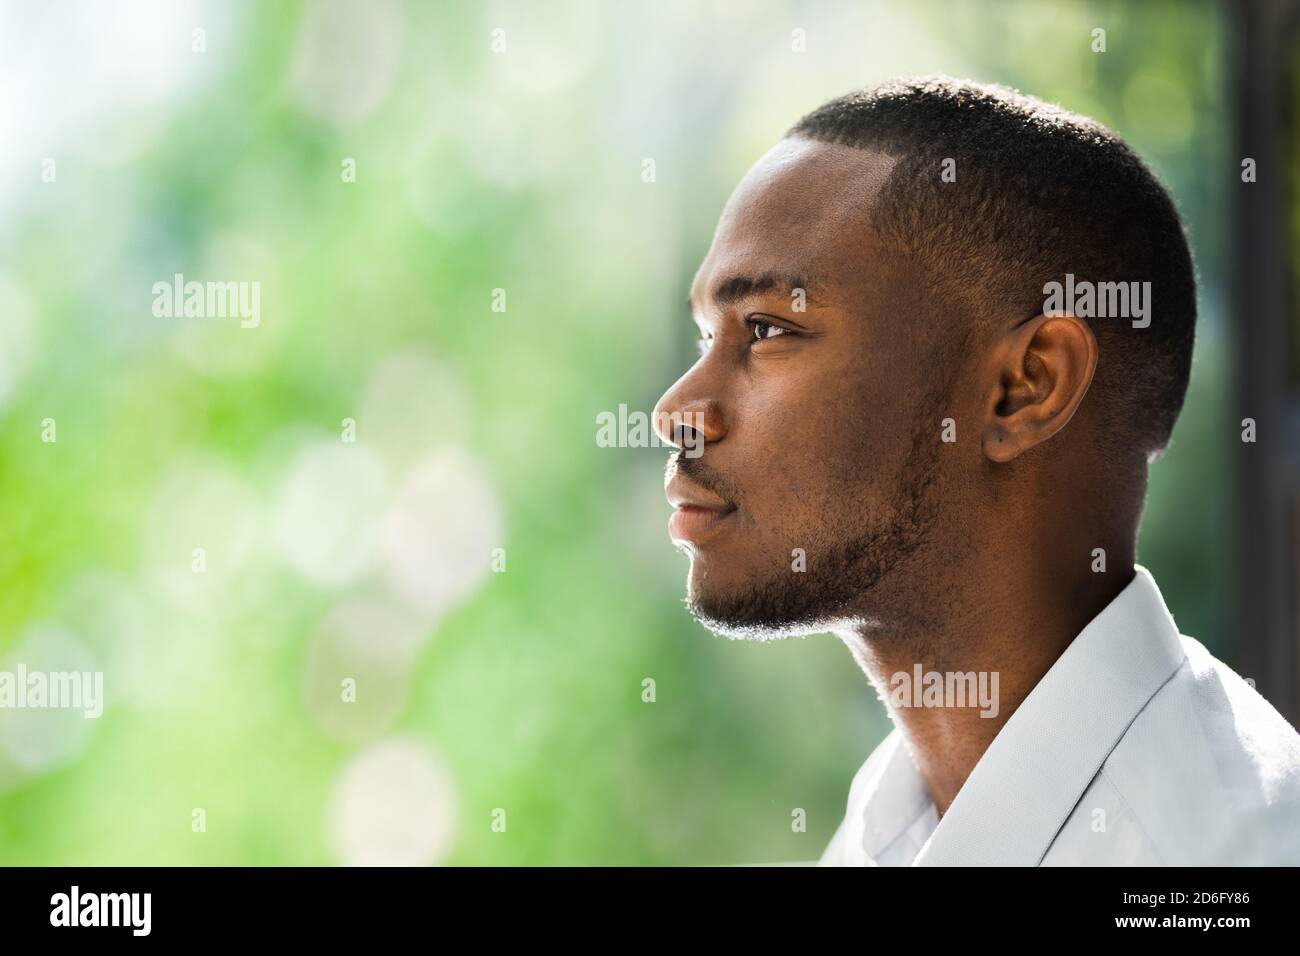 Breath Clean Air. Relax In Nature One Day Stock Photo